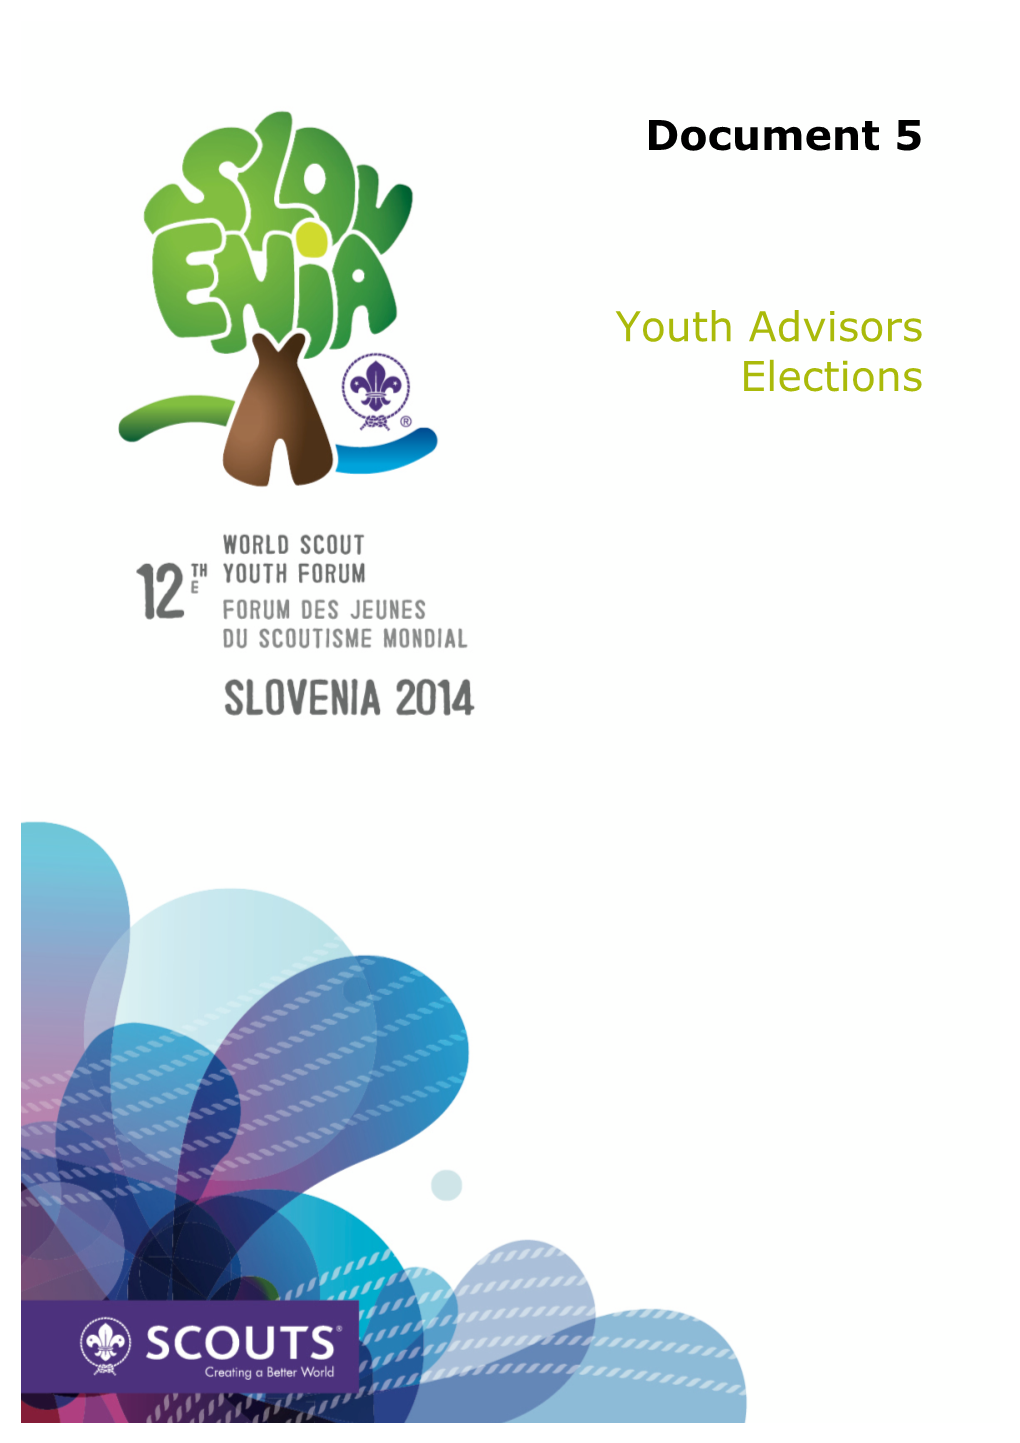 Document 5 Youth Advisors Elections